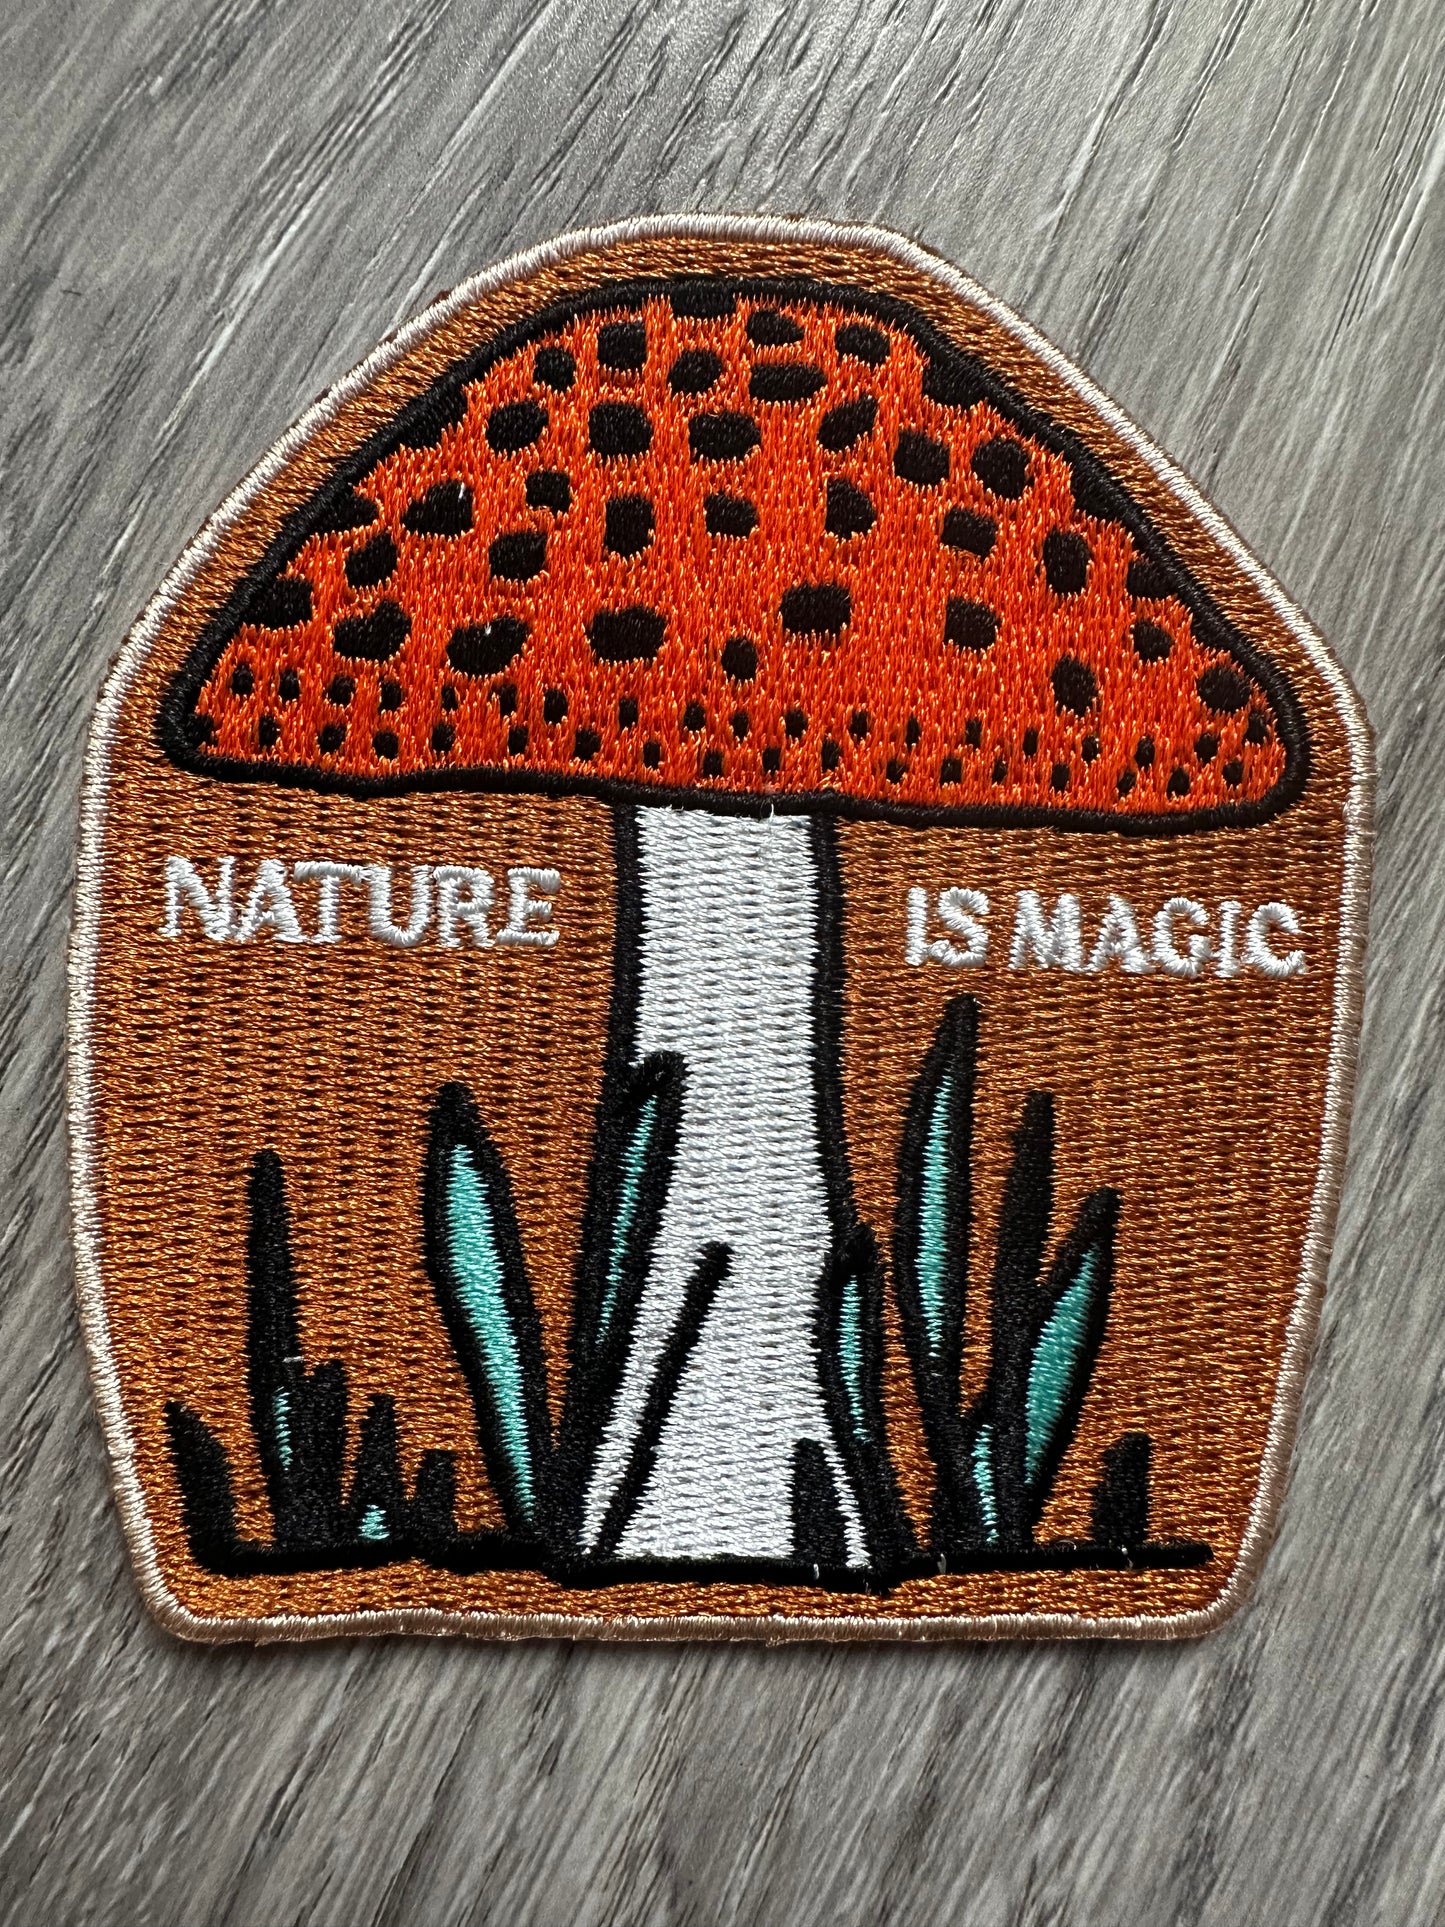 Nature Is Magic 3.5” Iron on/ Sew On Embroidered